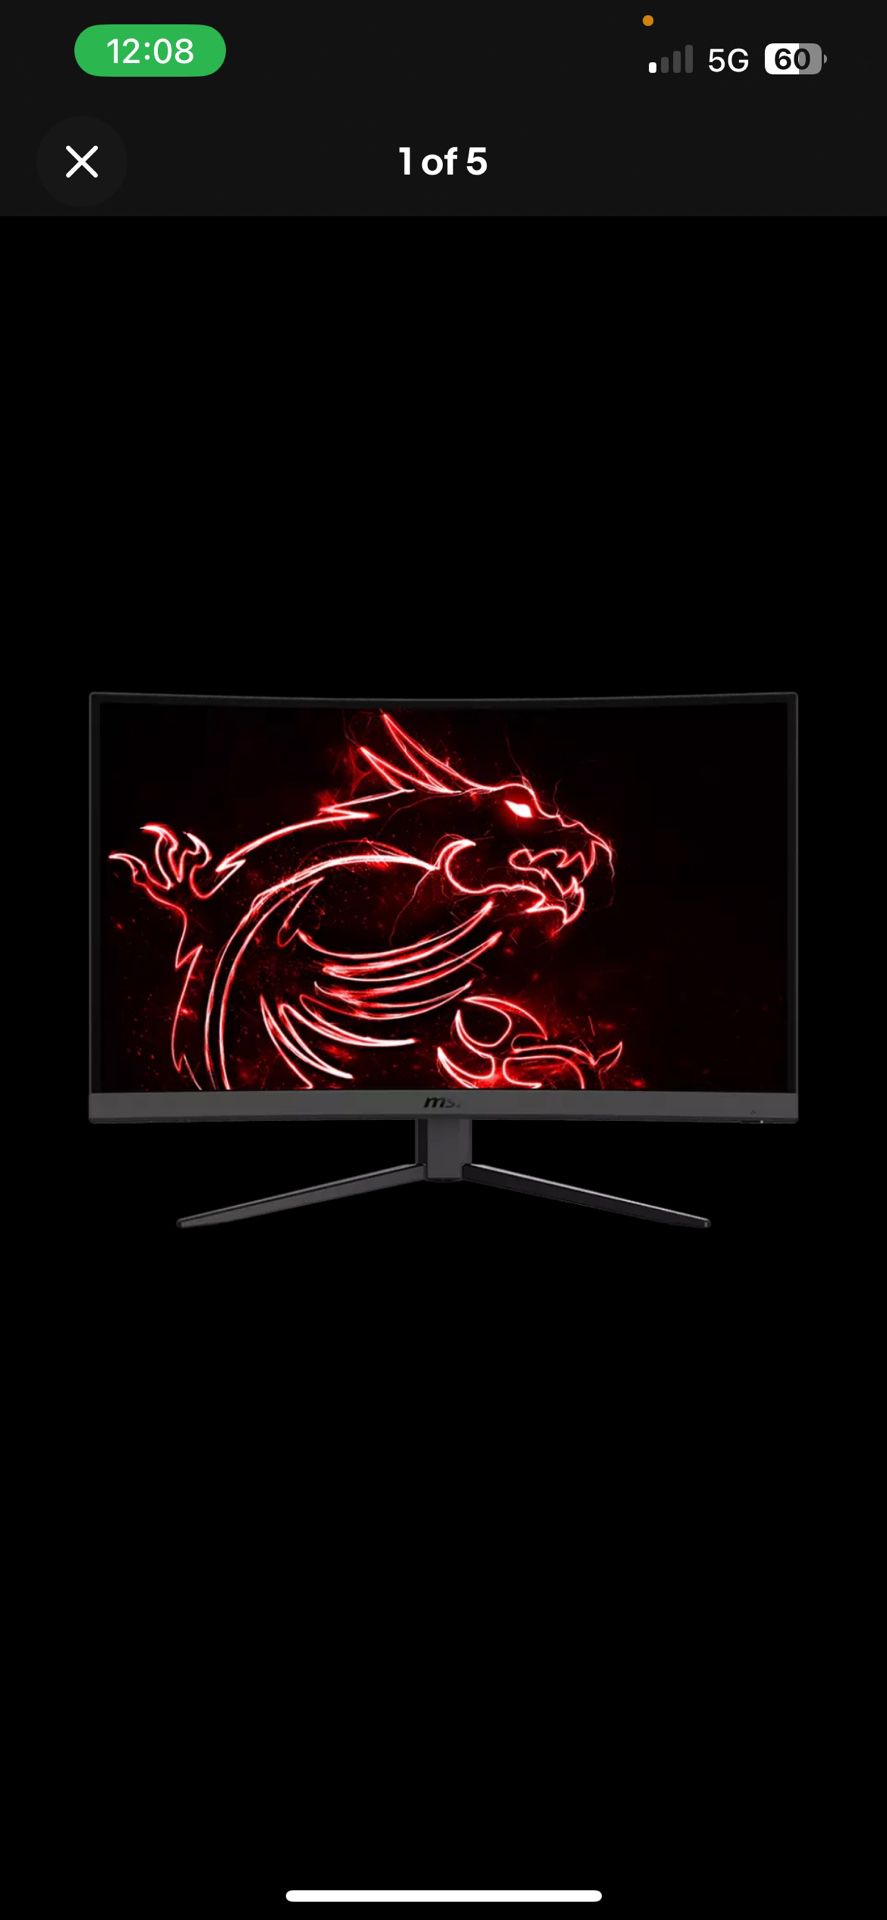 < See Gaming Monitors MSI - G321CU 32" Curved 4K UHD 144Hz 1ms FreeSync with HDR Gaming Monitor(DisplayPort,Type-C, HDMI) - Black 